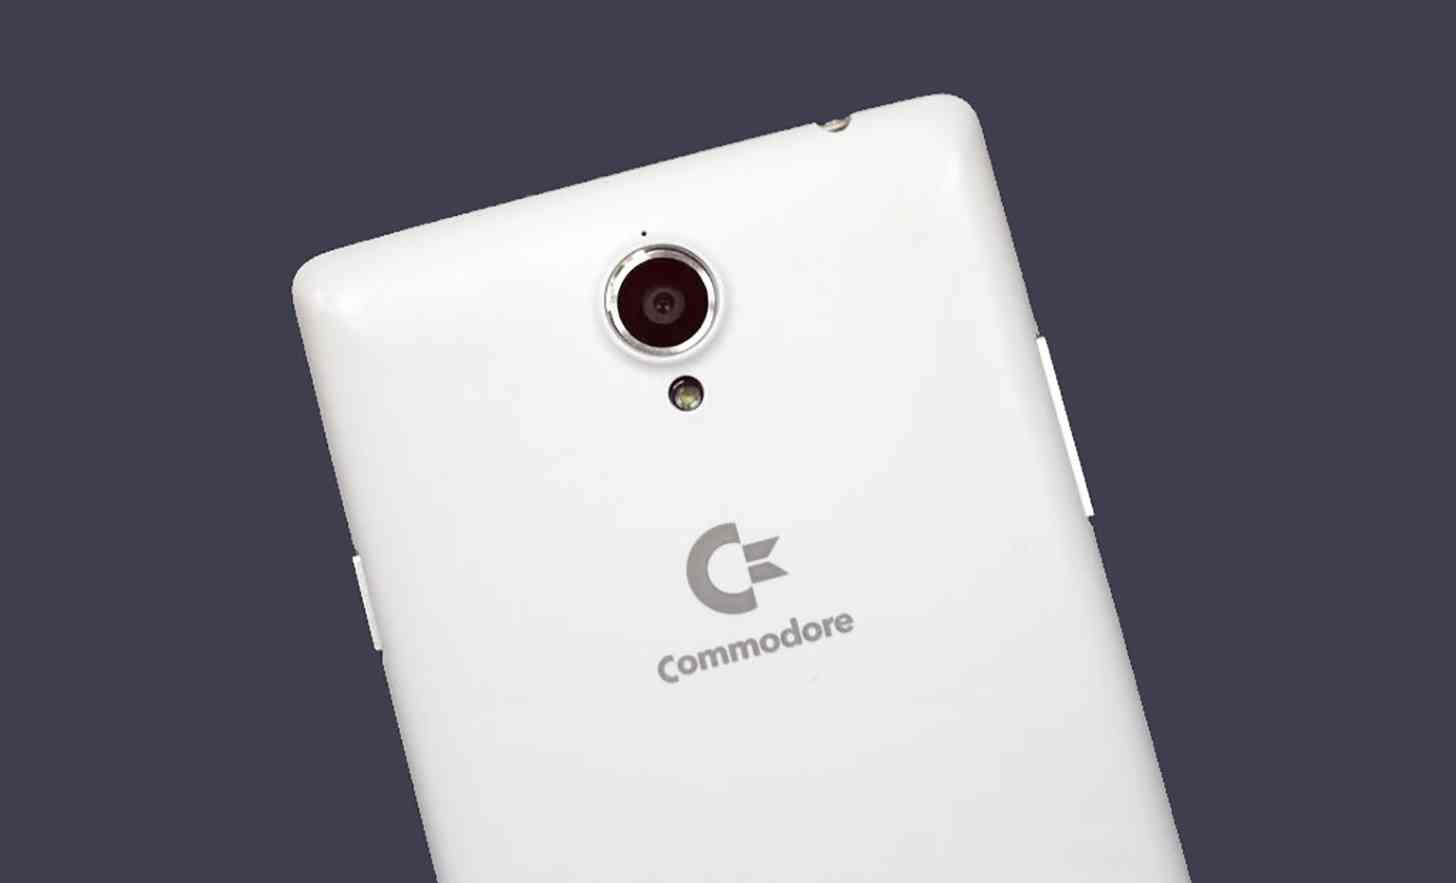 Commodore PET Android smartphone